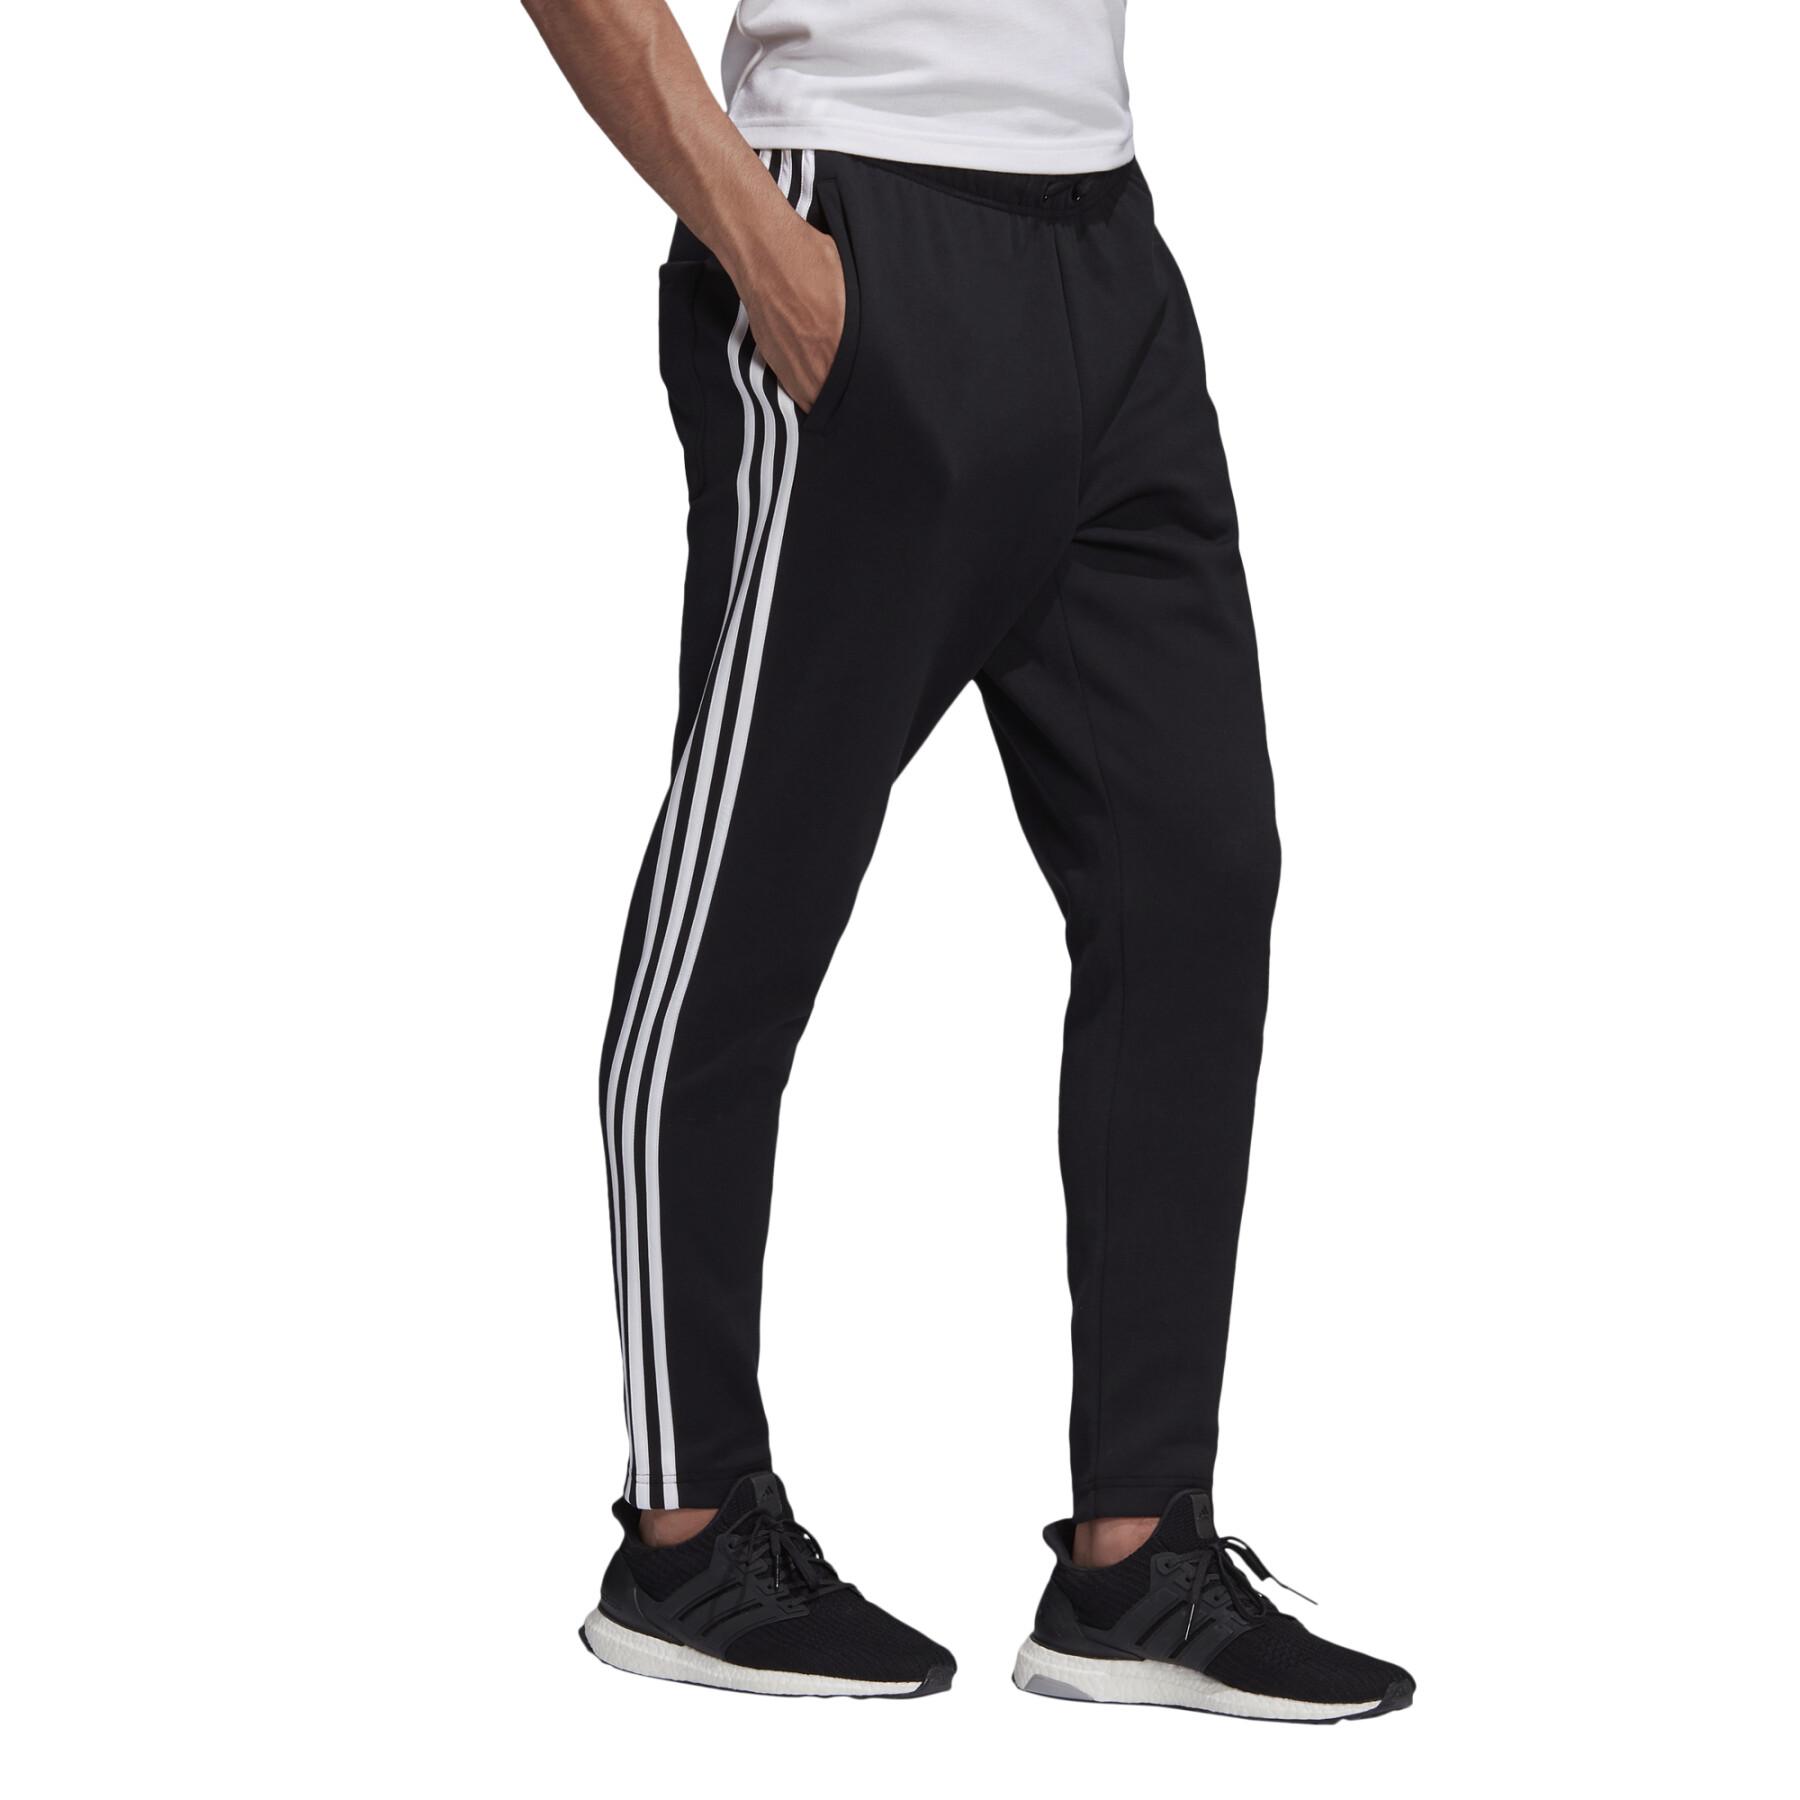 Pantalones adidas Must Haves 3-Stripes Tapered